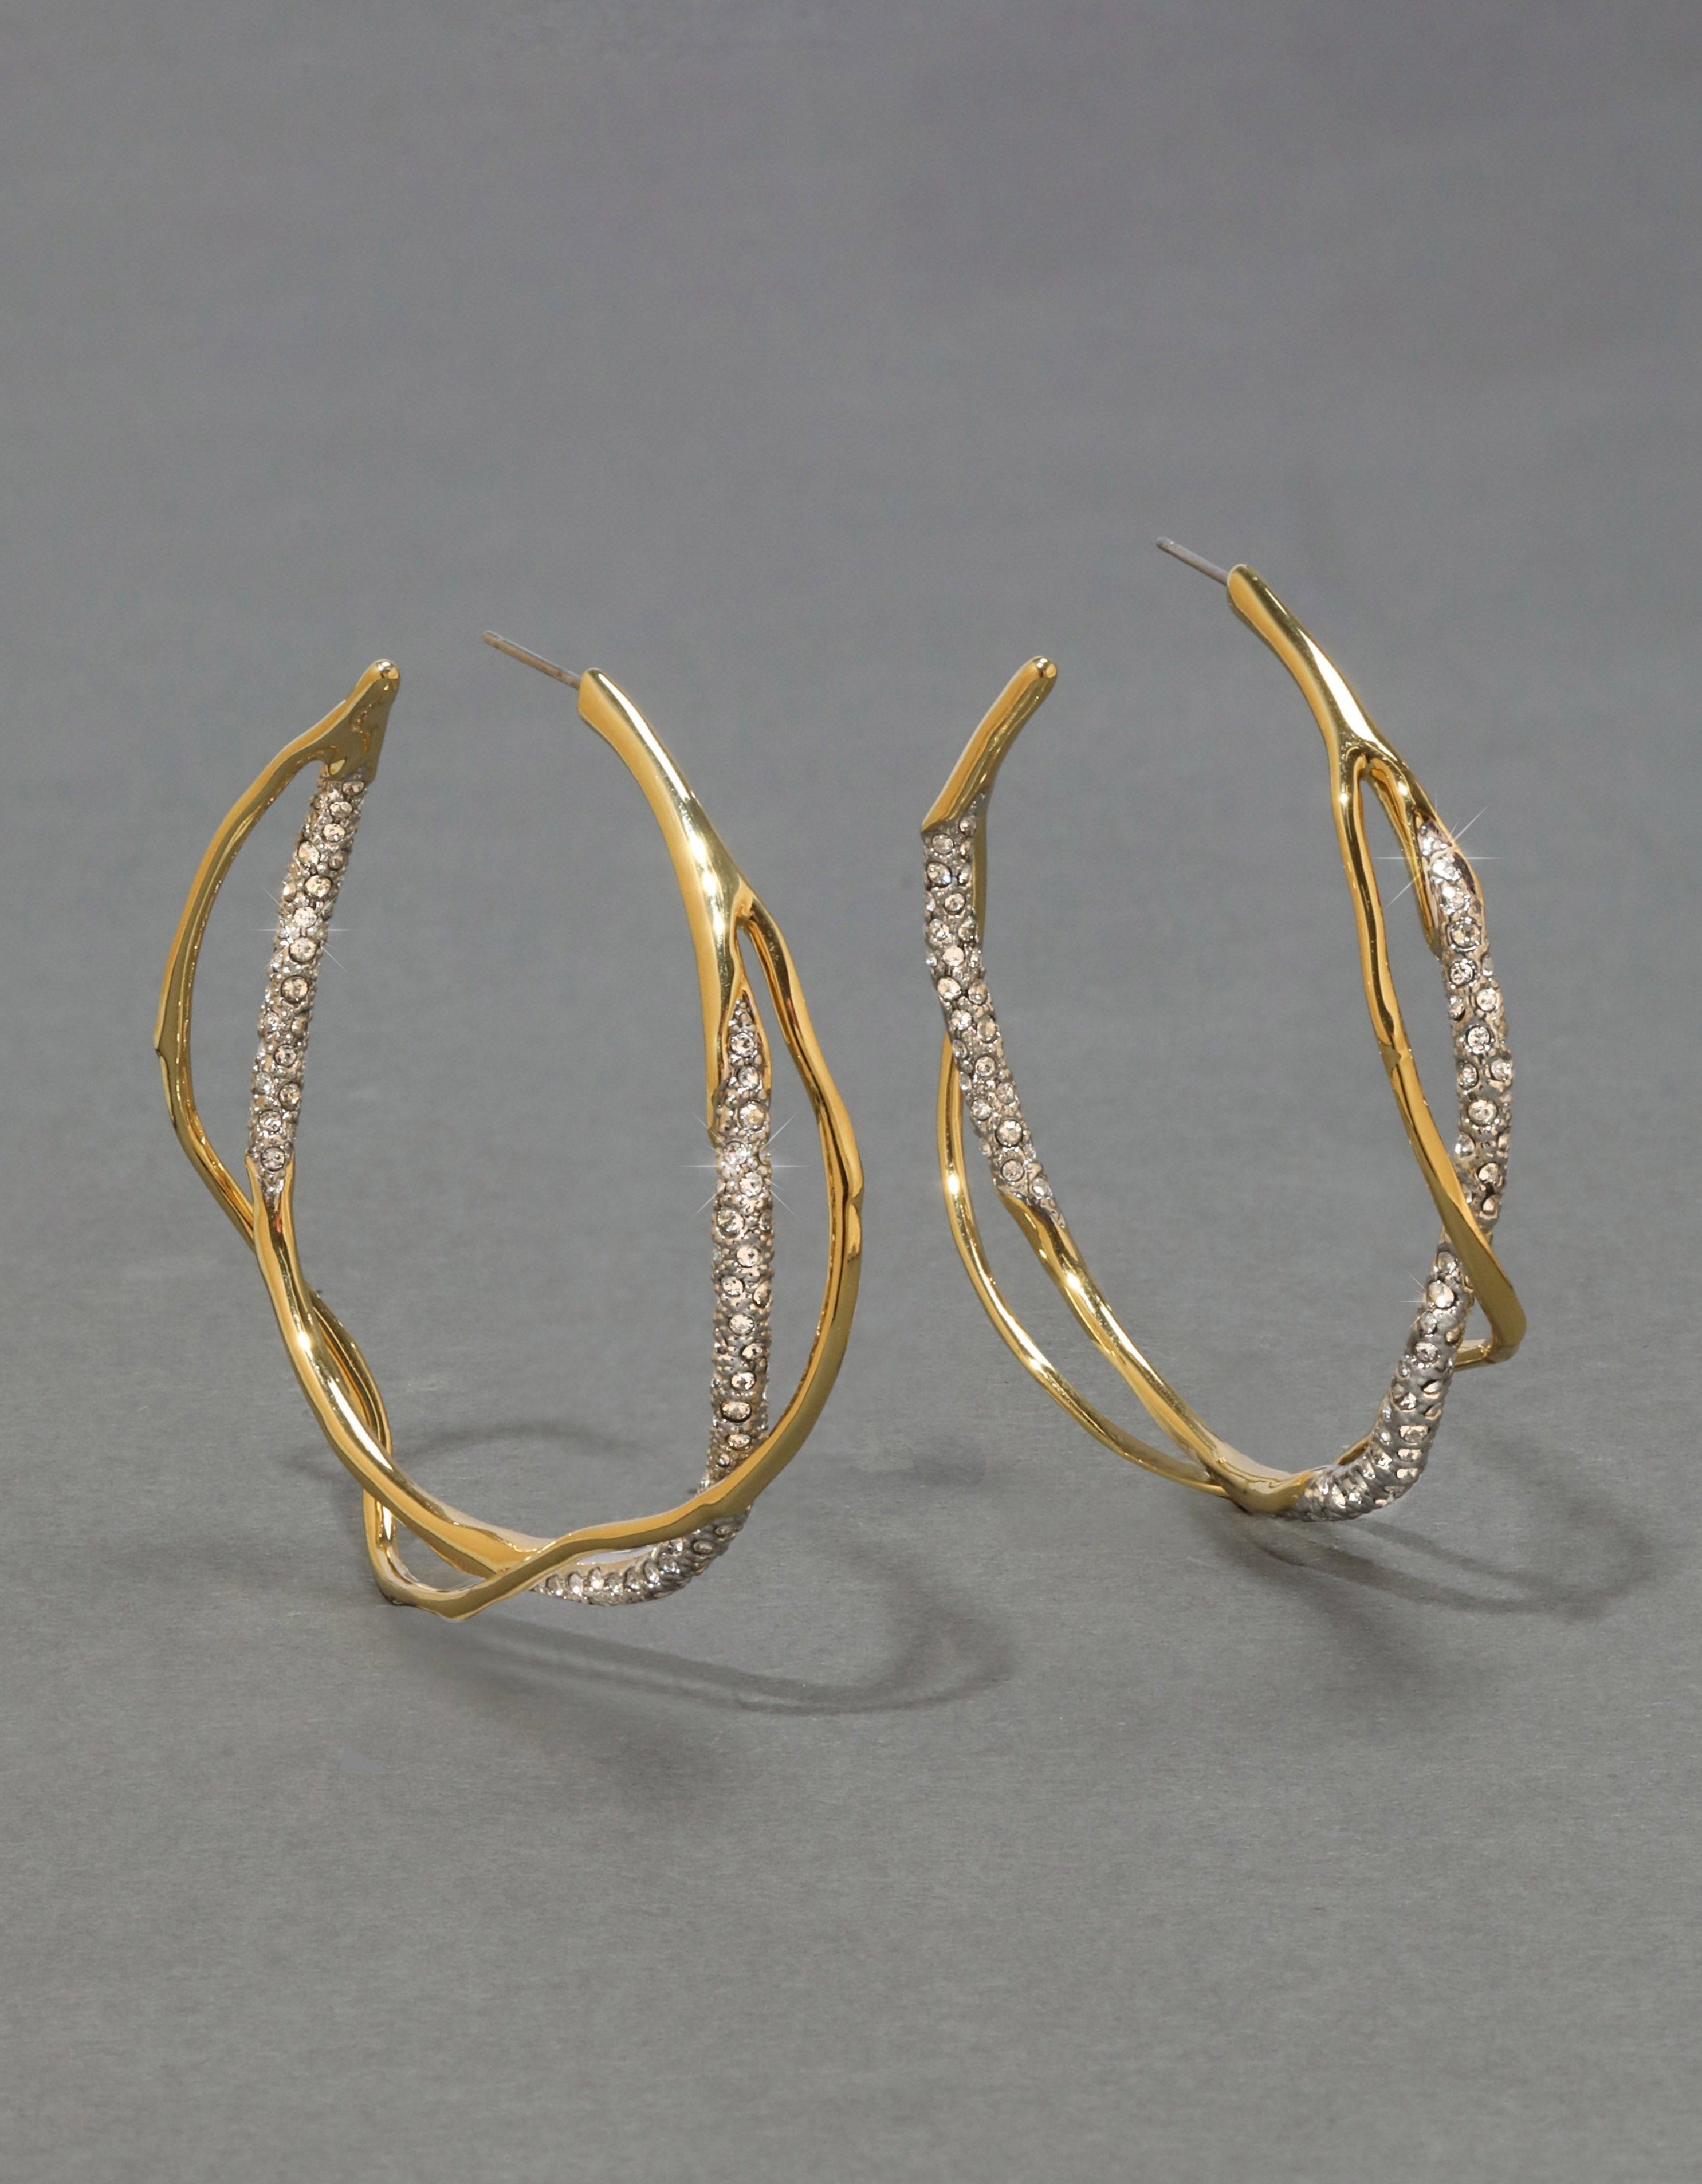 Intertwined Two Tone Pave Hoop Earring | ALEXIS BITTAR